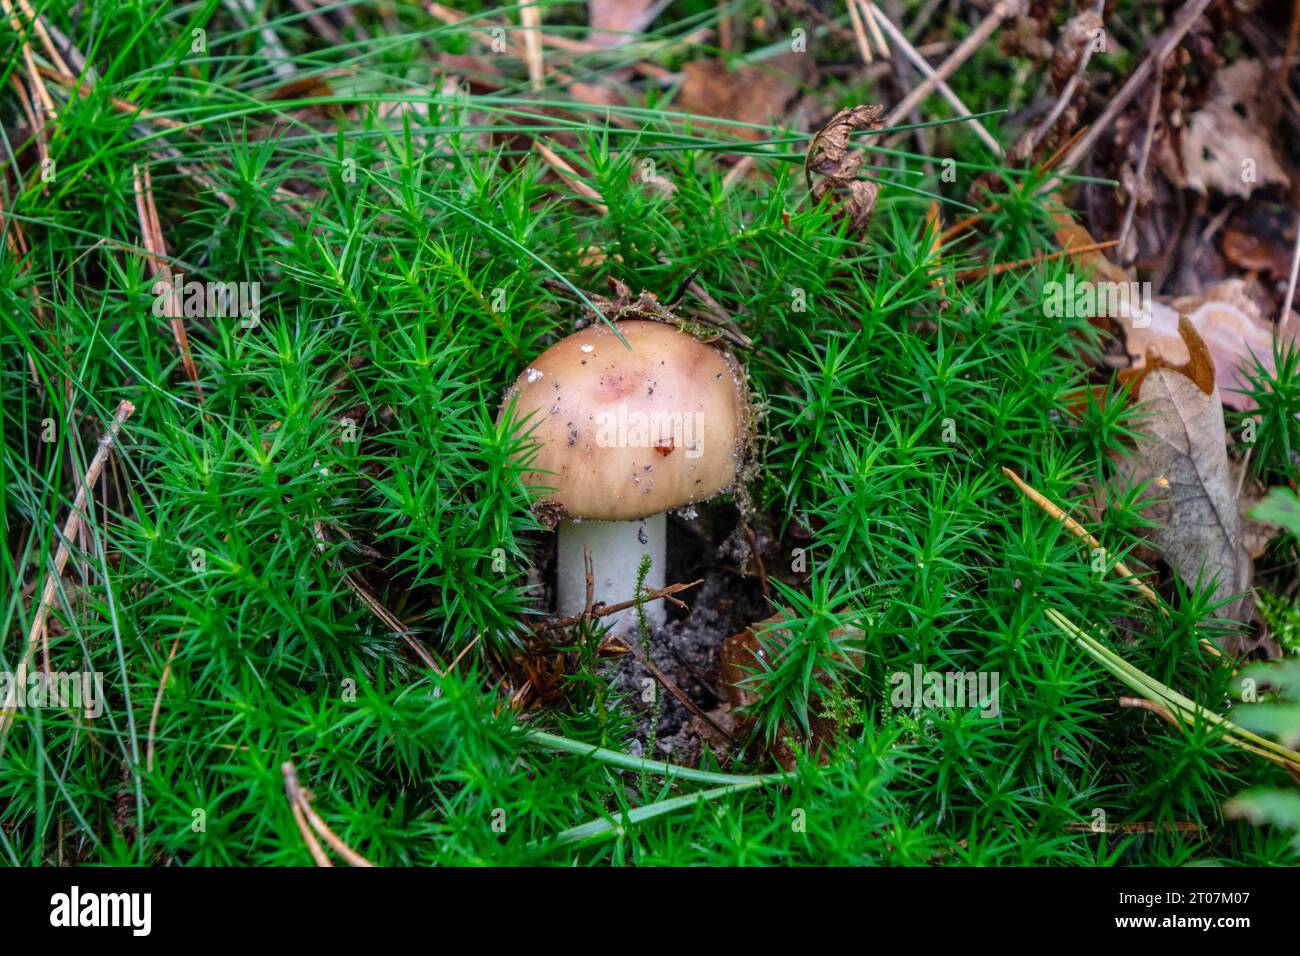 A forest mushroom growing among fallen leaves in the woods Stock Photo